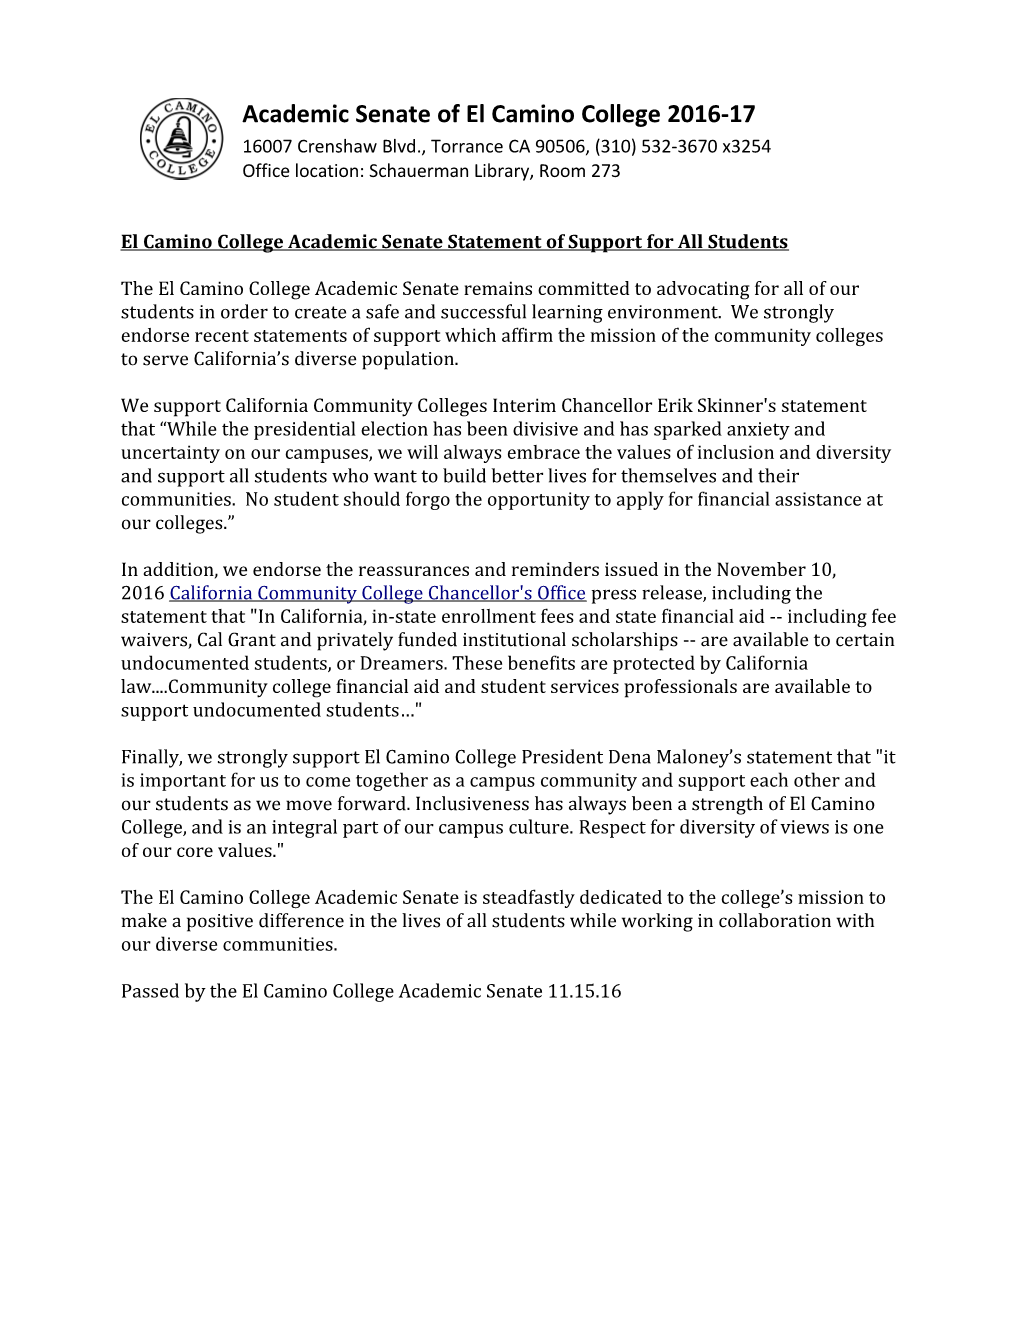 El Camino College Academic Senate Statement of Support for All Students